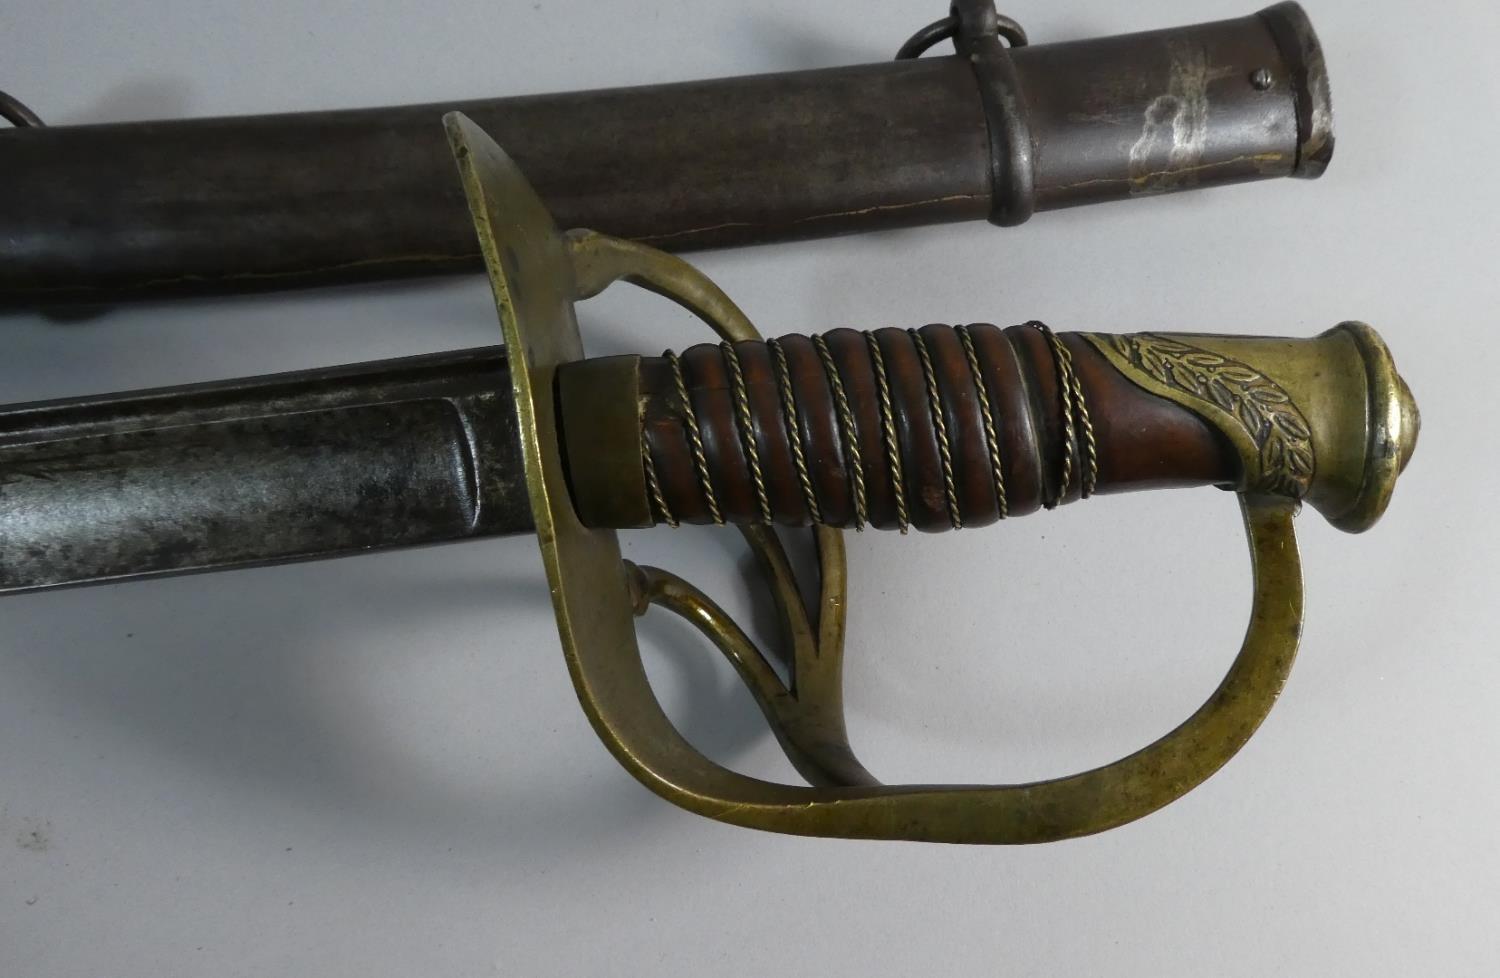 A 19th Century French Cavalry Sword with Wire Bound Grip and Brass Hilt. Shortened Blade, Steel - Image 2 of 5